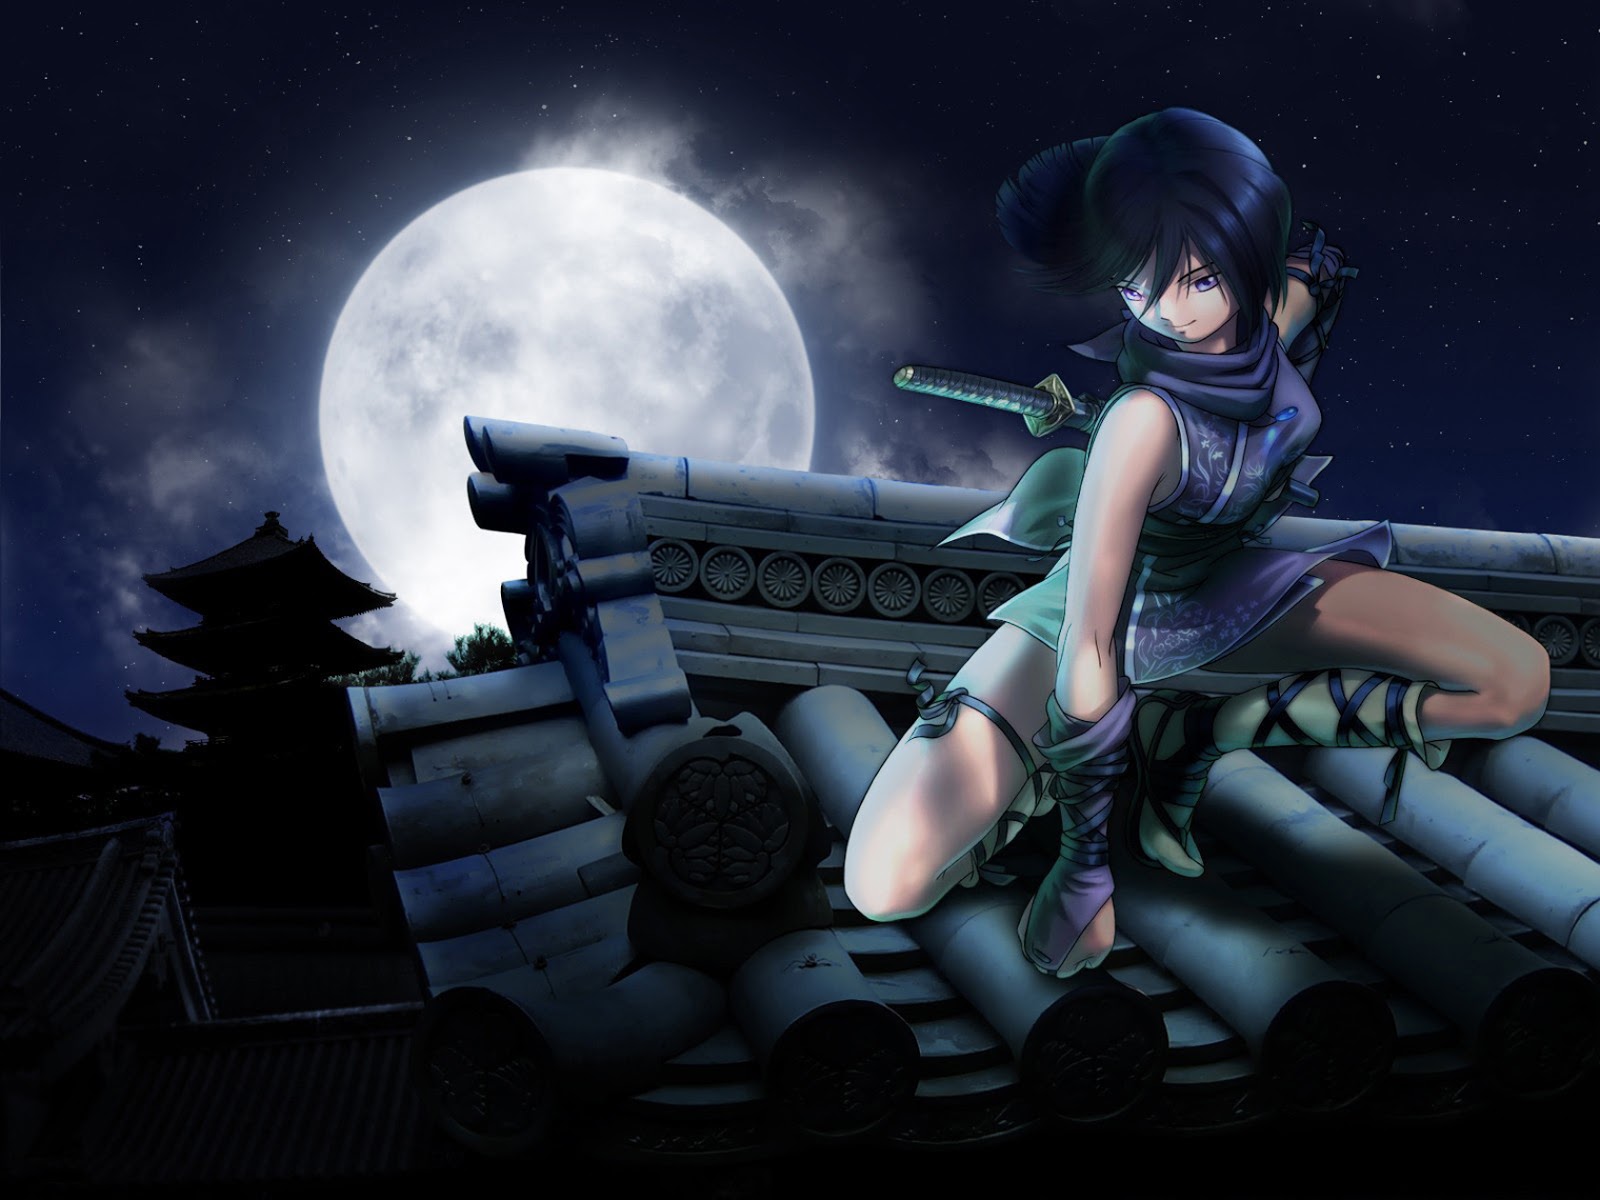 Collection of 600+ Moonlight background anime Full HD and free